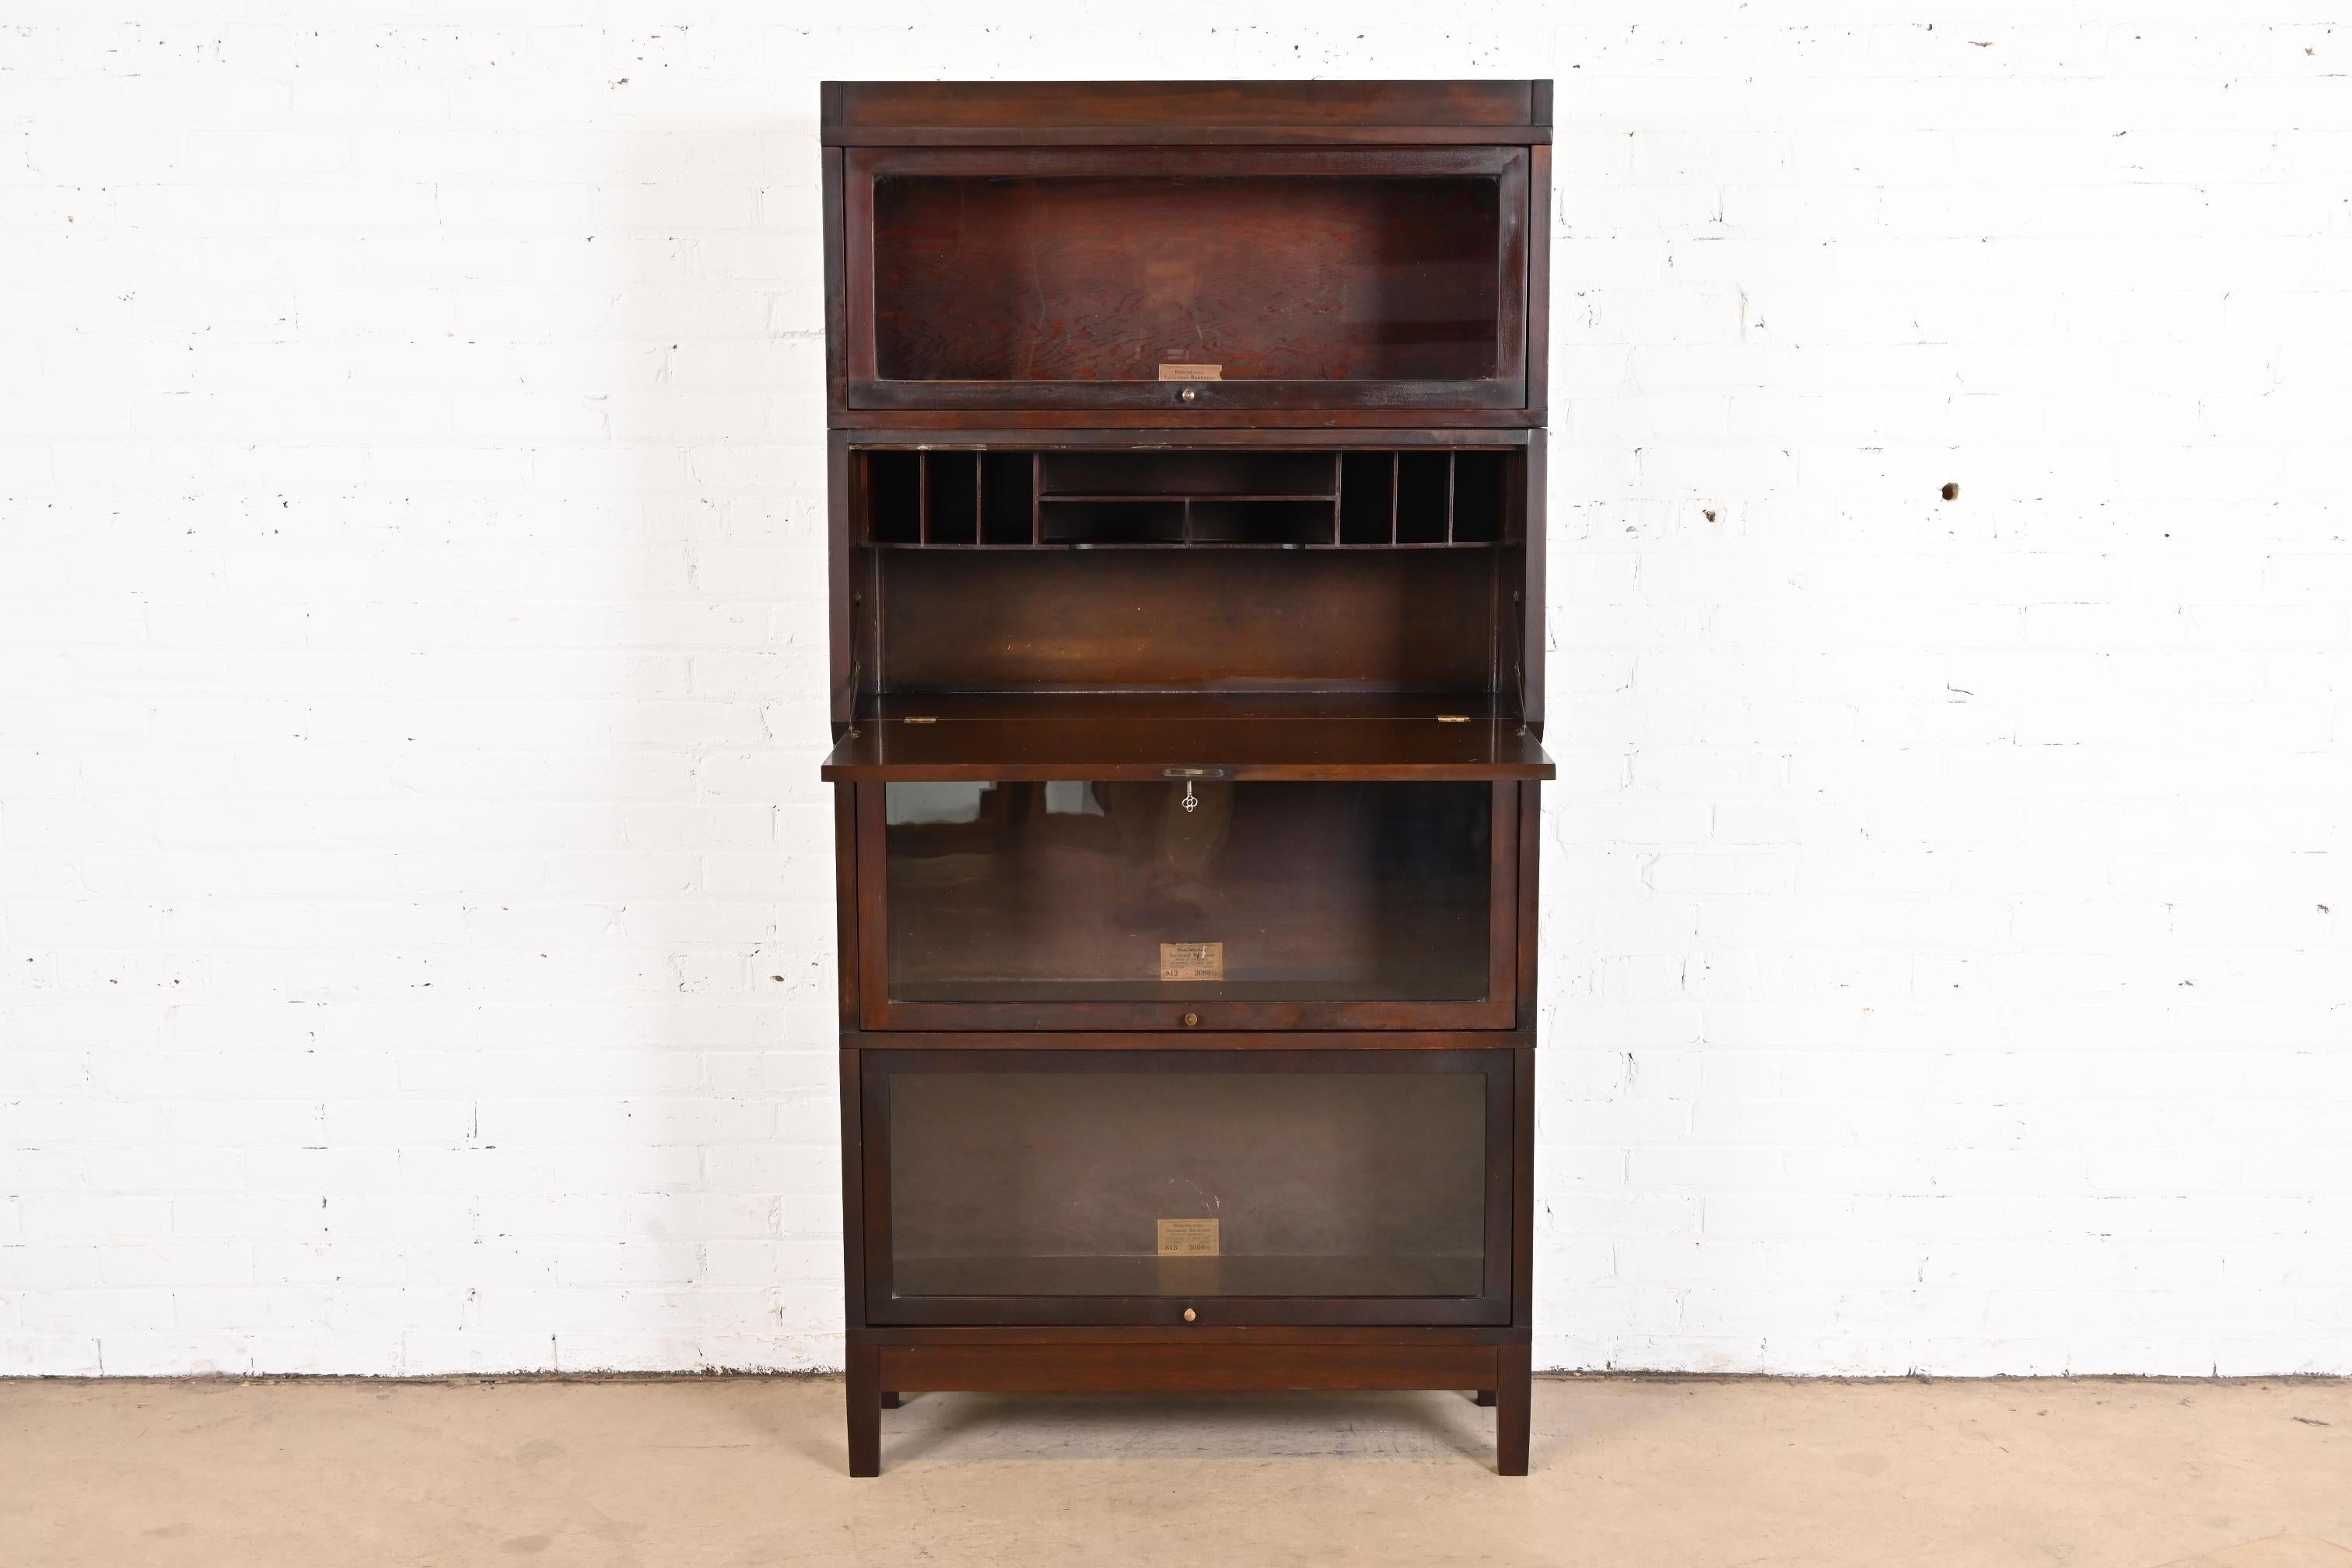 A gorgeous antique Arts & Crafts stacking barrister bookcase with fall front secretary desk

By Globe Wernicke

USA, circa 1900

Mahogany, with glass front doors and brass hardware. Desk locks, and key is included.

Measures: 34.25